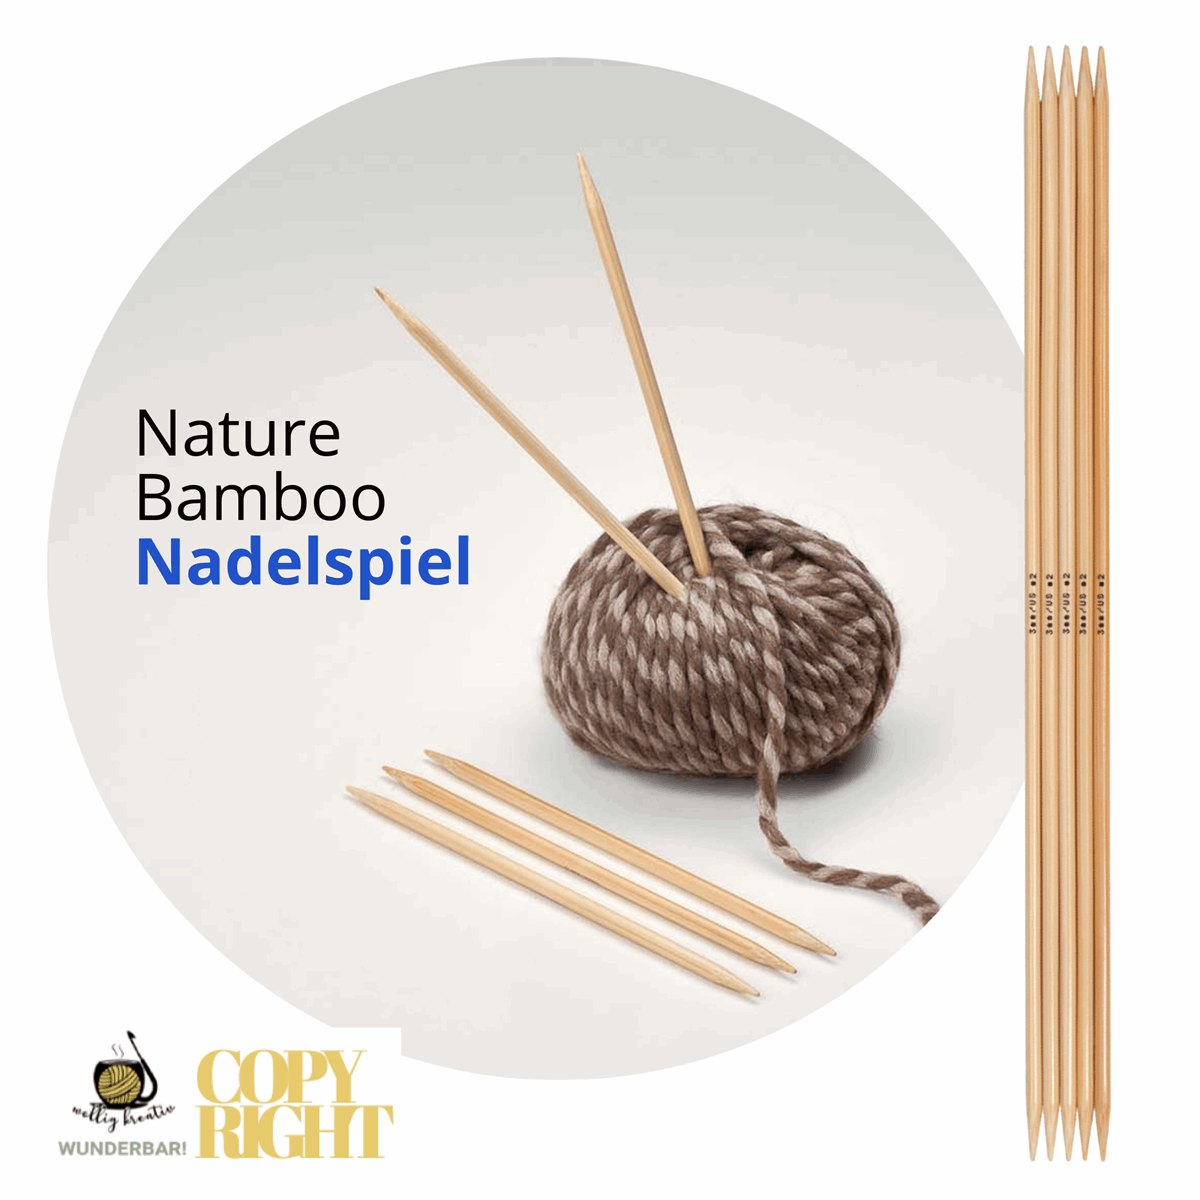 Addi, Nature Bamboo double pointed needles, 65012, size 6.5 length 20 cm